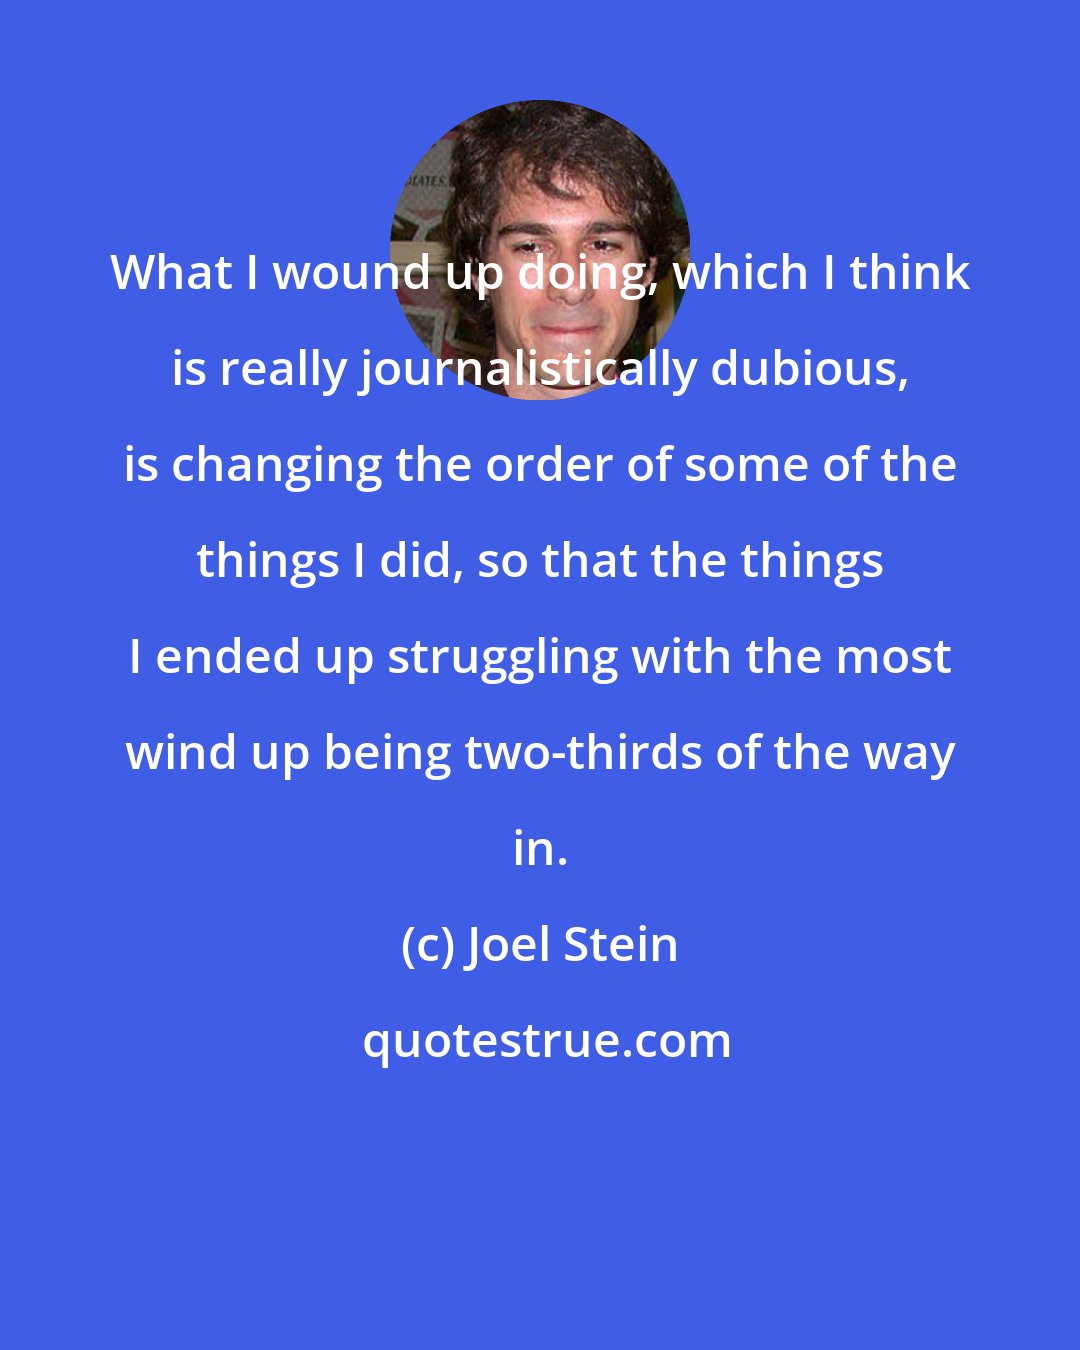 Joel Stein: What I wound up doing, which I think is really journalistically dubious, is changing the order of some of the things I did, so that the things I ended up struggling with the most wind up being two-thirds of the way in.